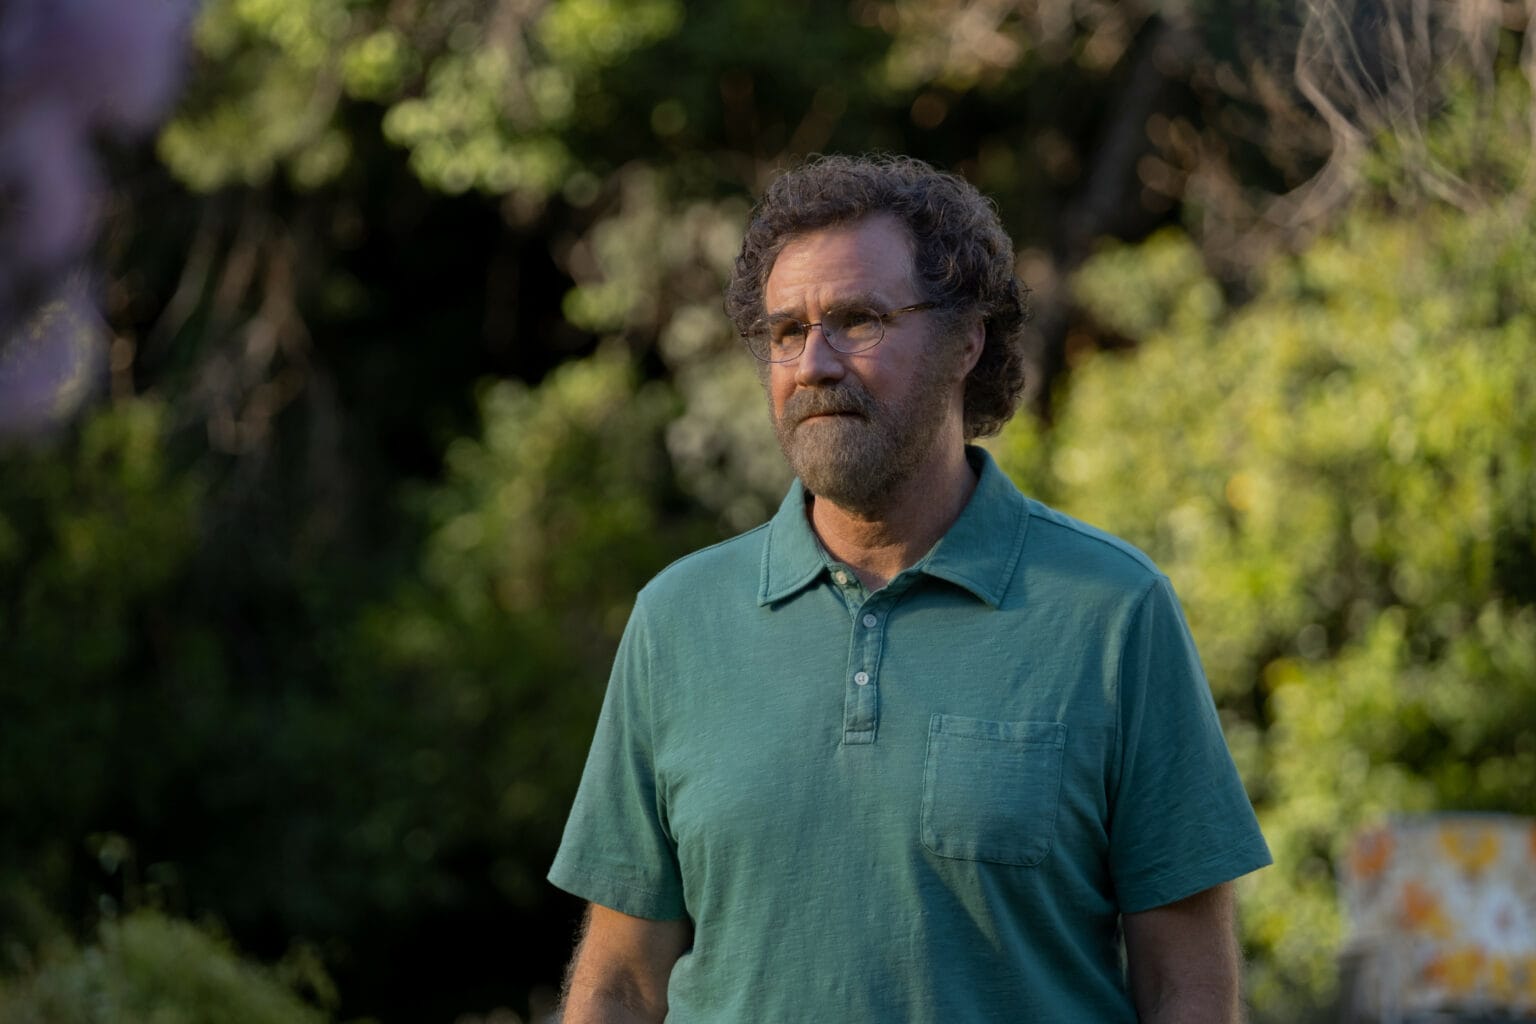 The Shrink Next Door recap: You can't help but feel sorry for Will Ferrell's character, Marty. Ike, on the other hand ...